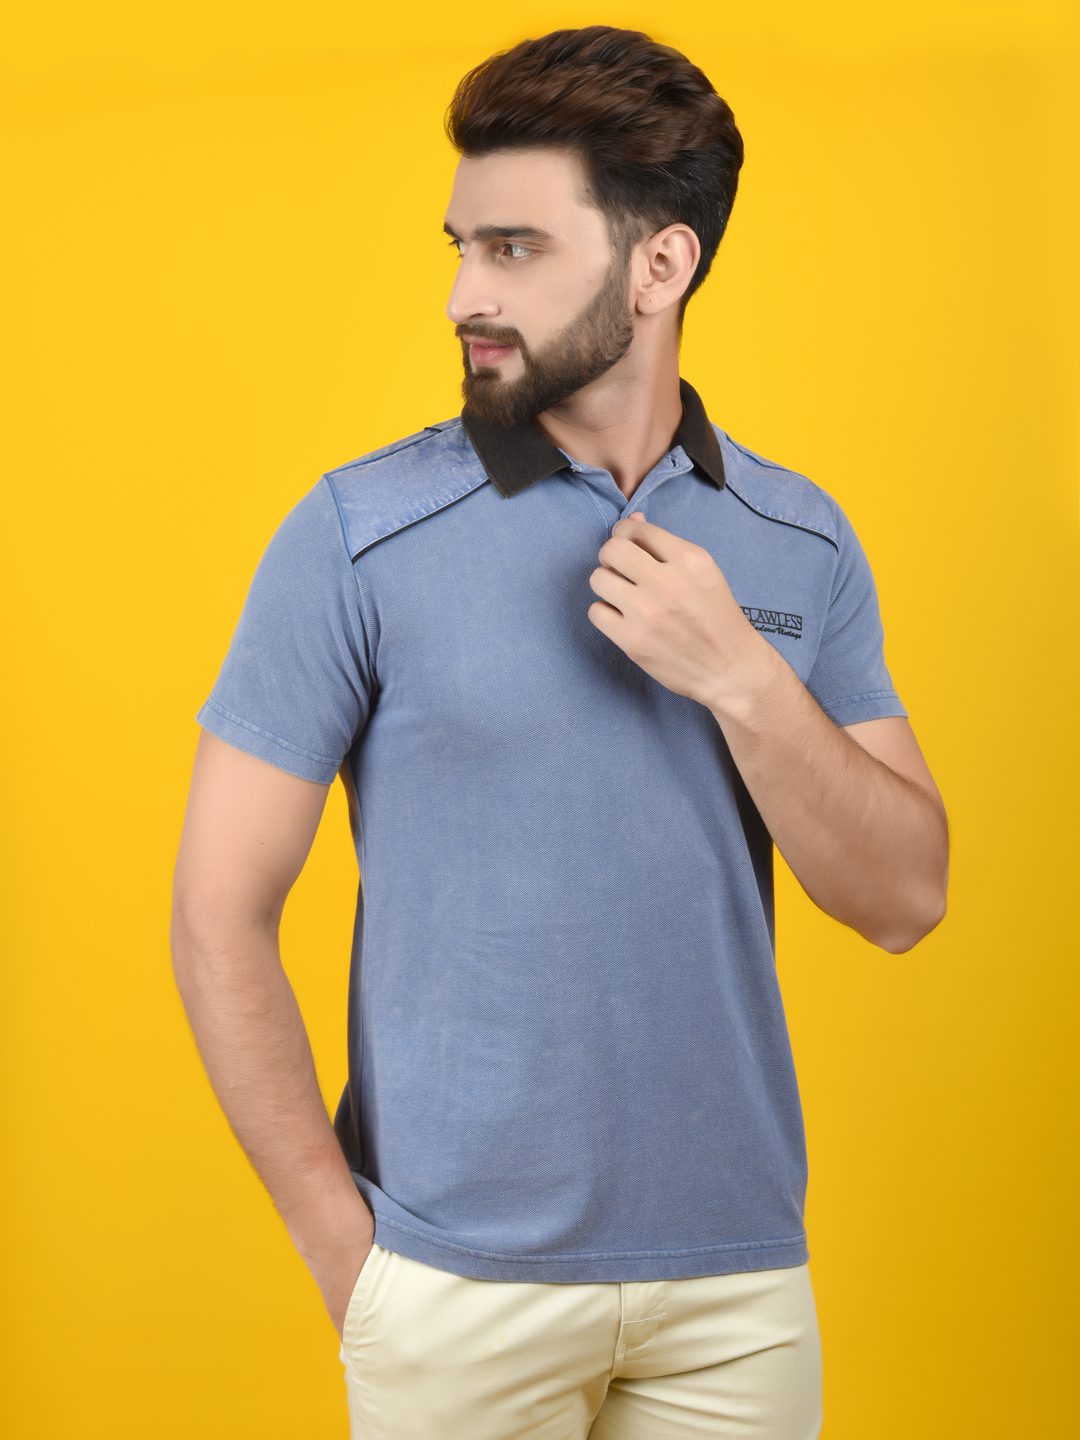 Flawless Men Blue Polo T-Shirt | 100% Cotton Pique | VINTAGE IRIS Being Flawless